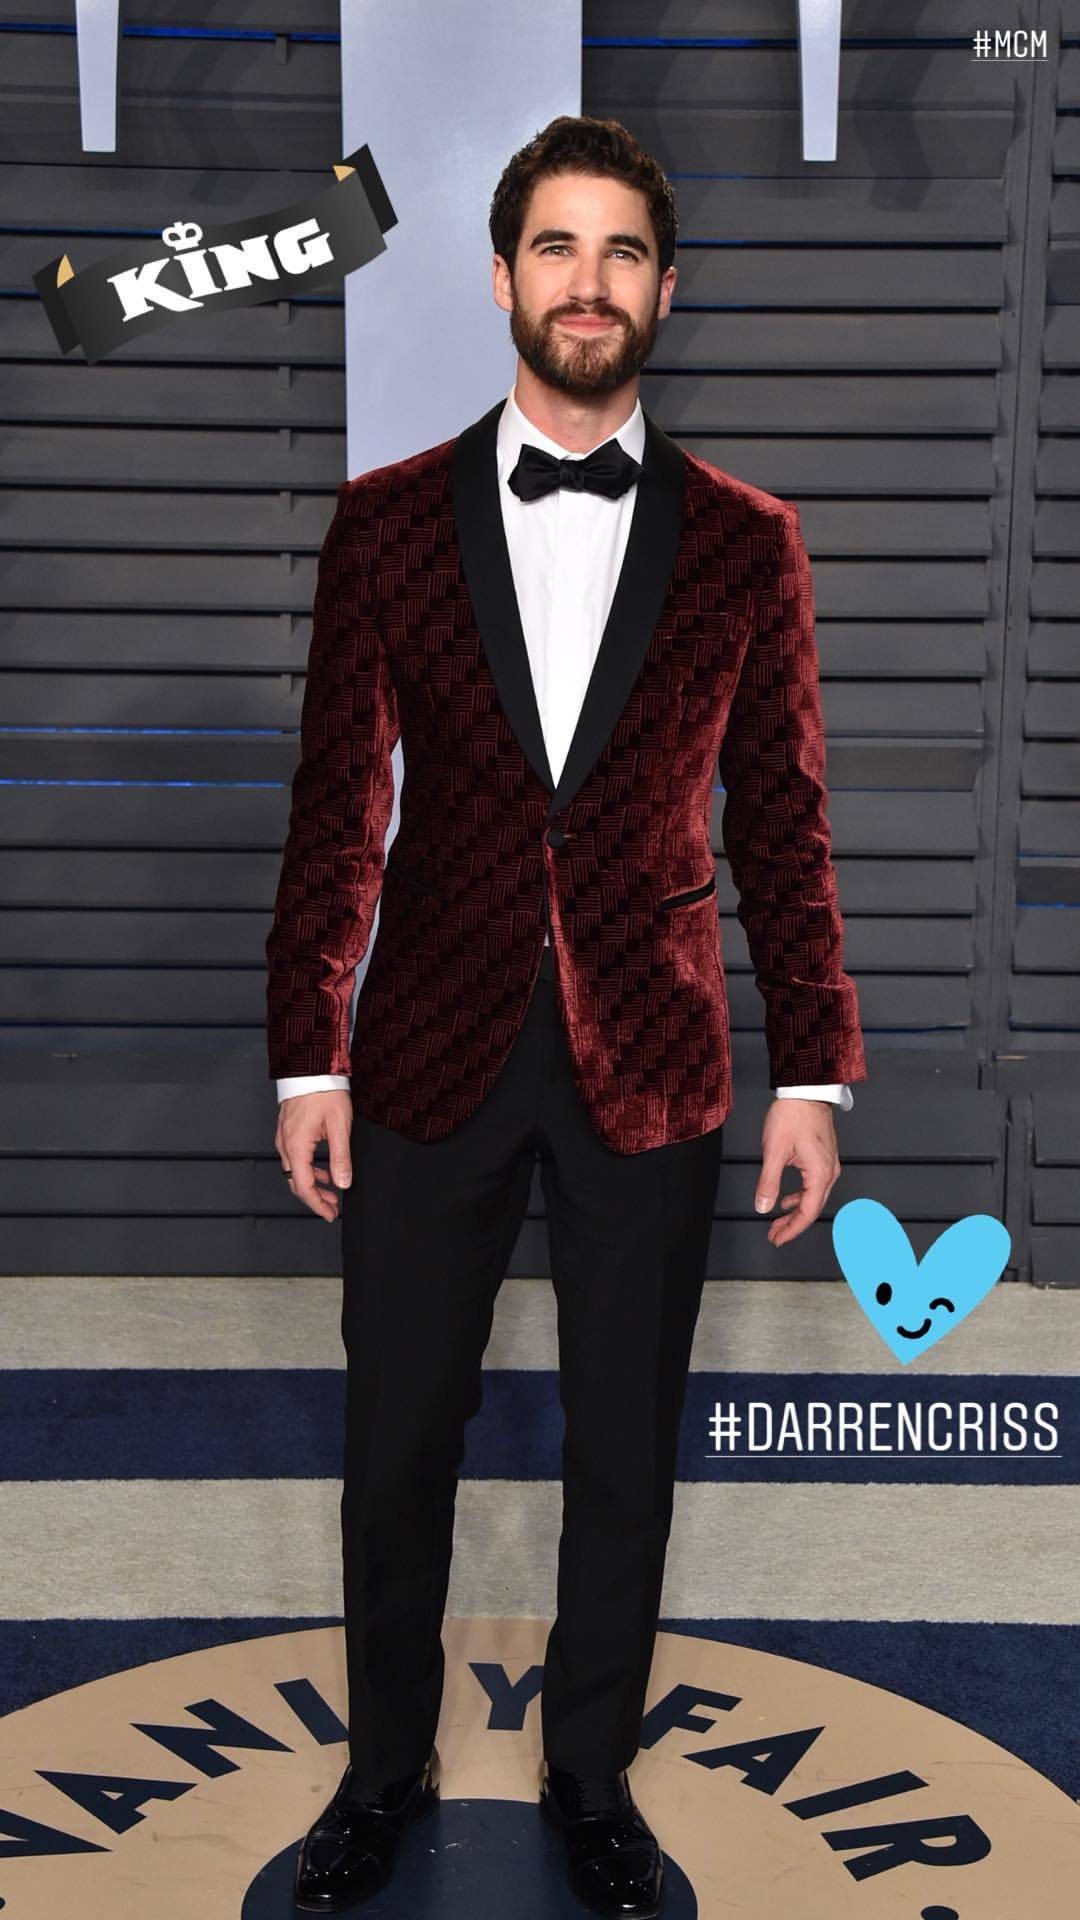 mensfashionweek - Darren's Miscellaneous Projects and Events for 2018 - Page 3 Tumblr_p67xapBh3g1wpi2k2o1_1280